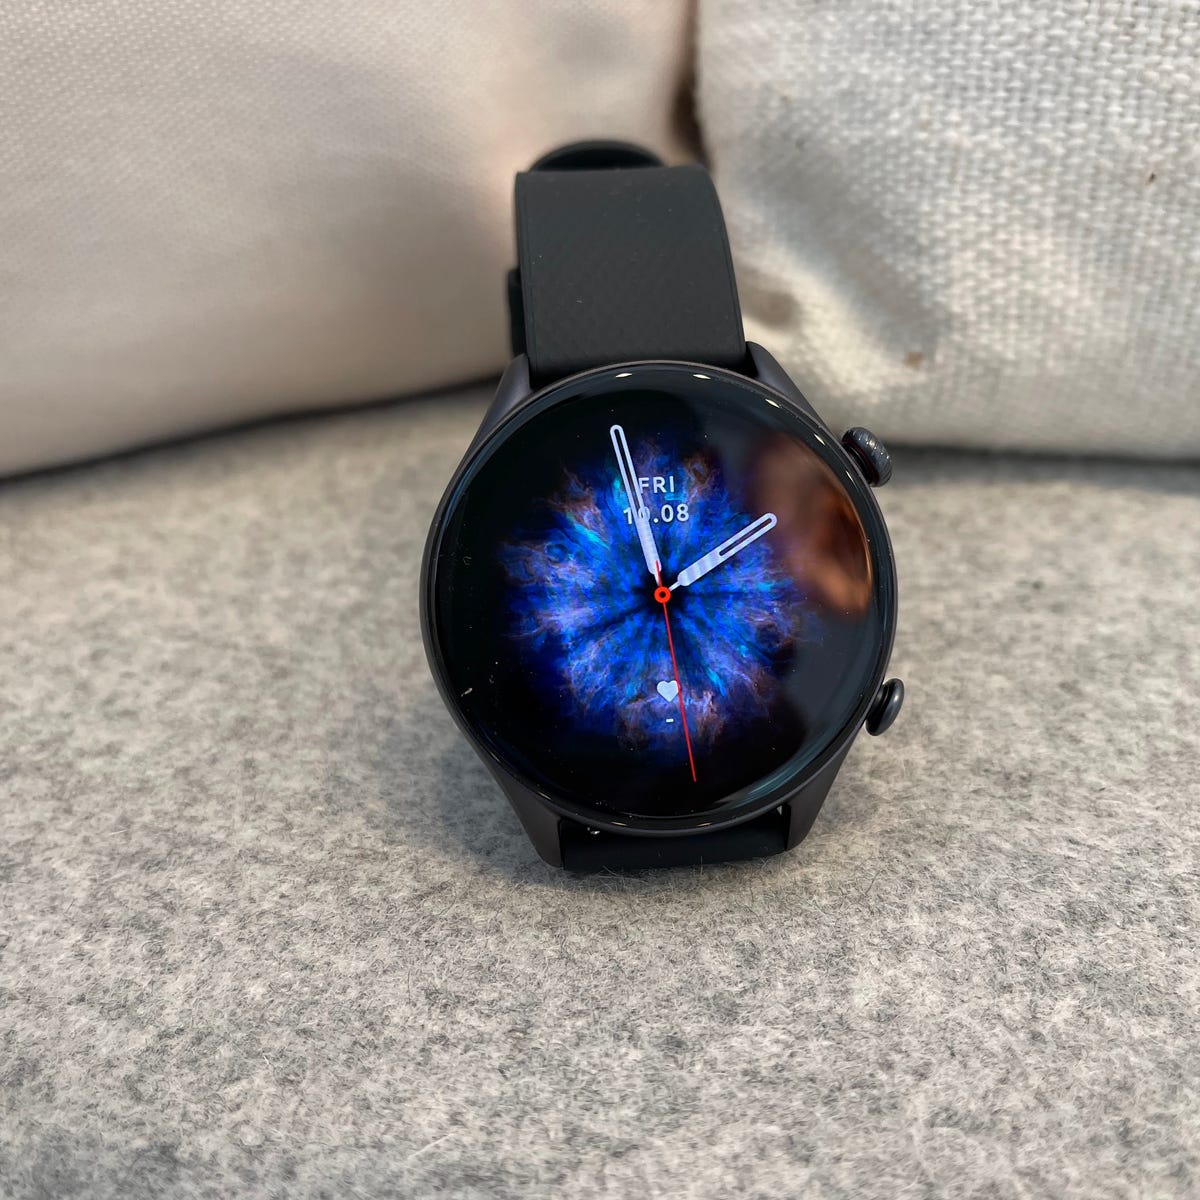 Amazfit refreshes GT series, adds a higher-end $230 GTR 3 Pro to the lineup  - CNET